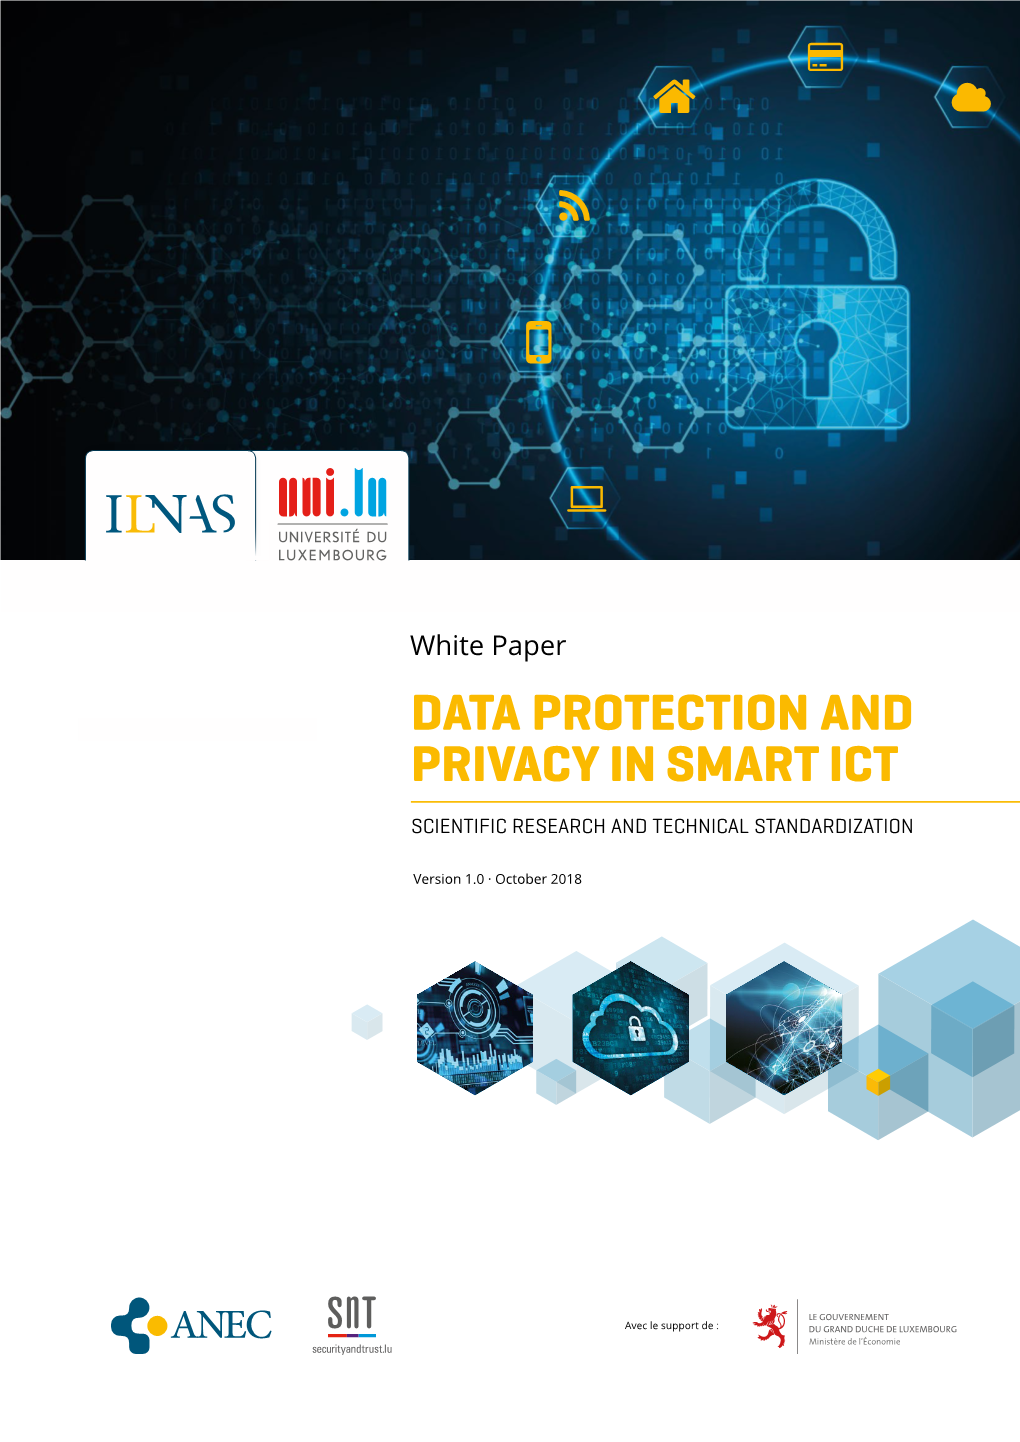 White Paper “Data Protection and Privacy in Smart ICT” As a First Outcome of Their Partnership